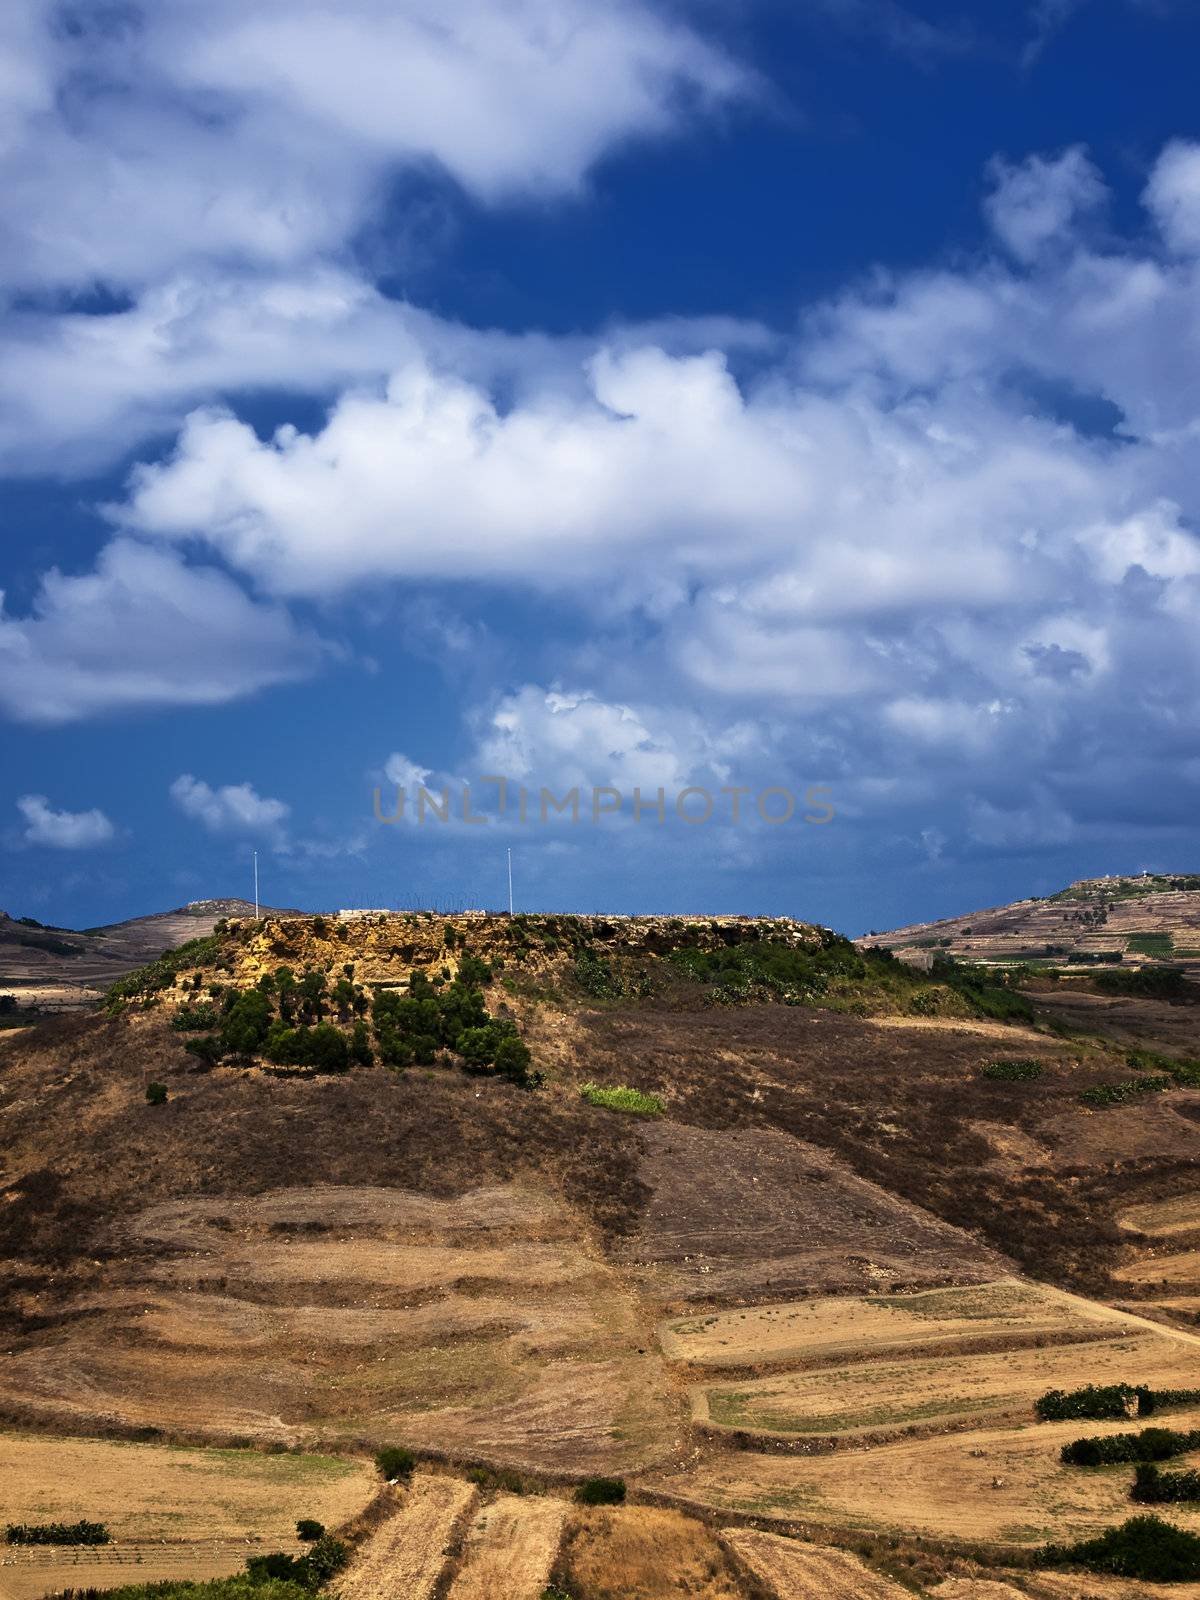 One of the many hills of Gozo as seen from the medieval Citadel